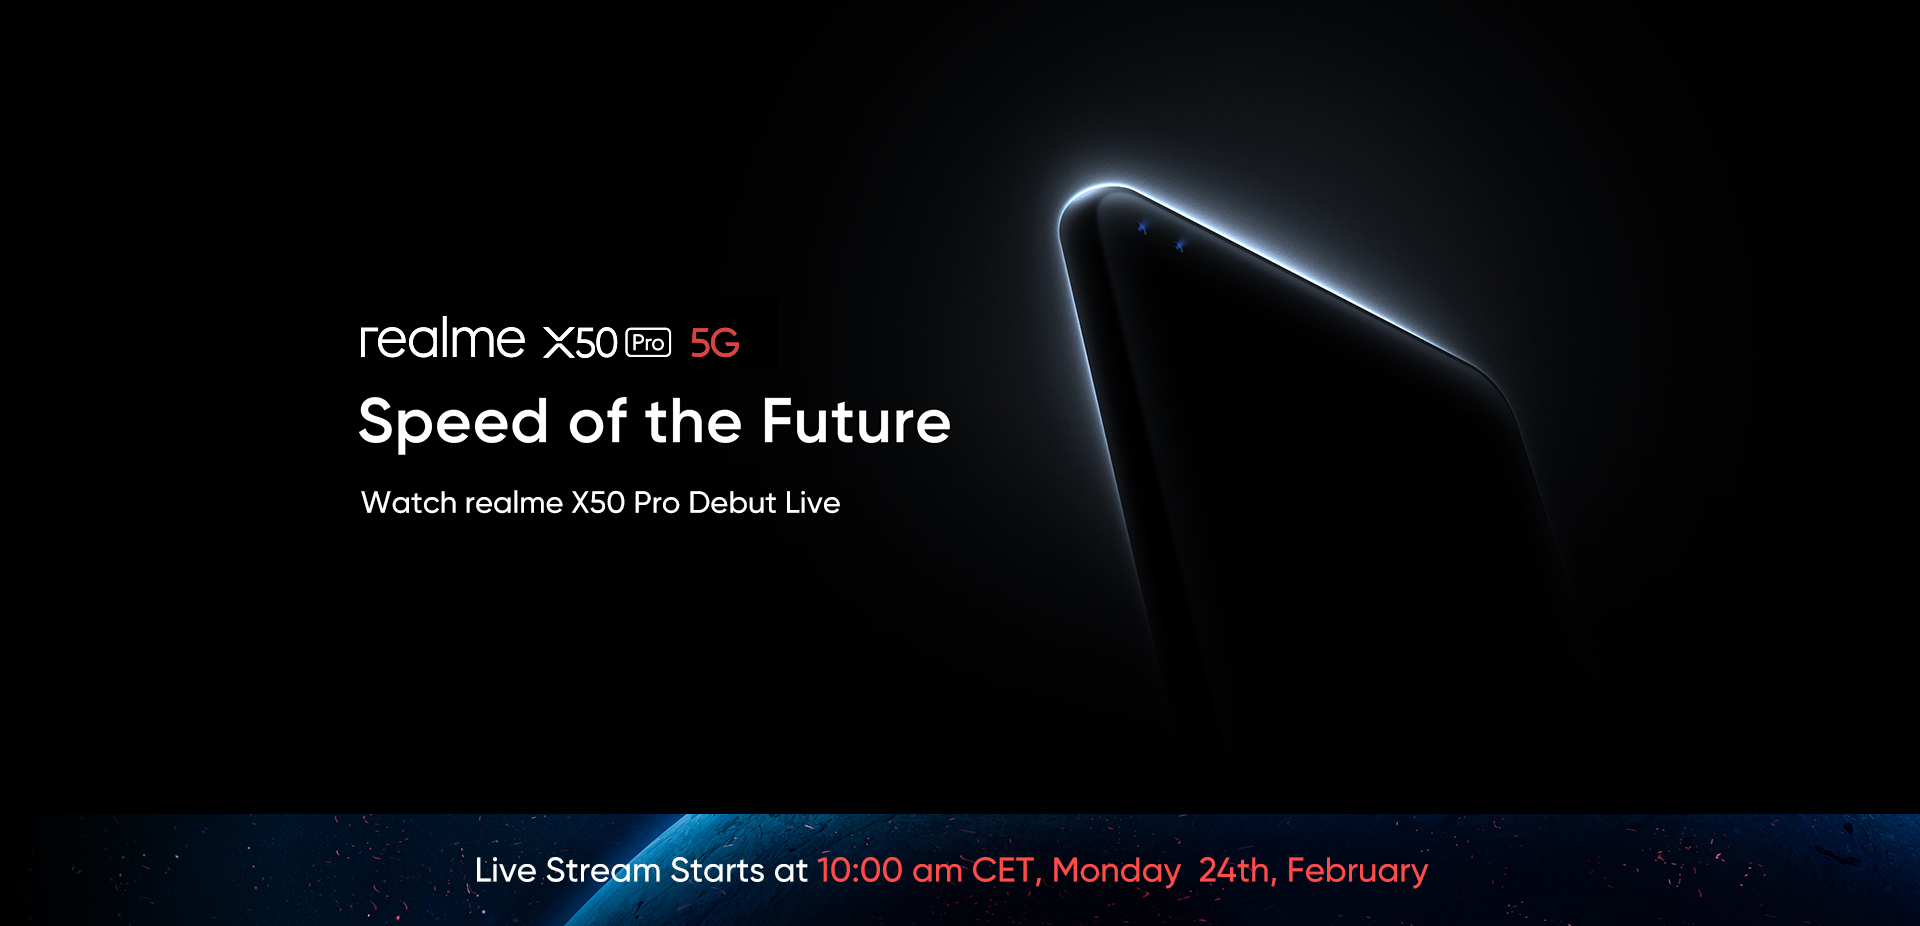 realme X50 Pro 5G Global Online Event Happening on February 24th